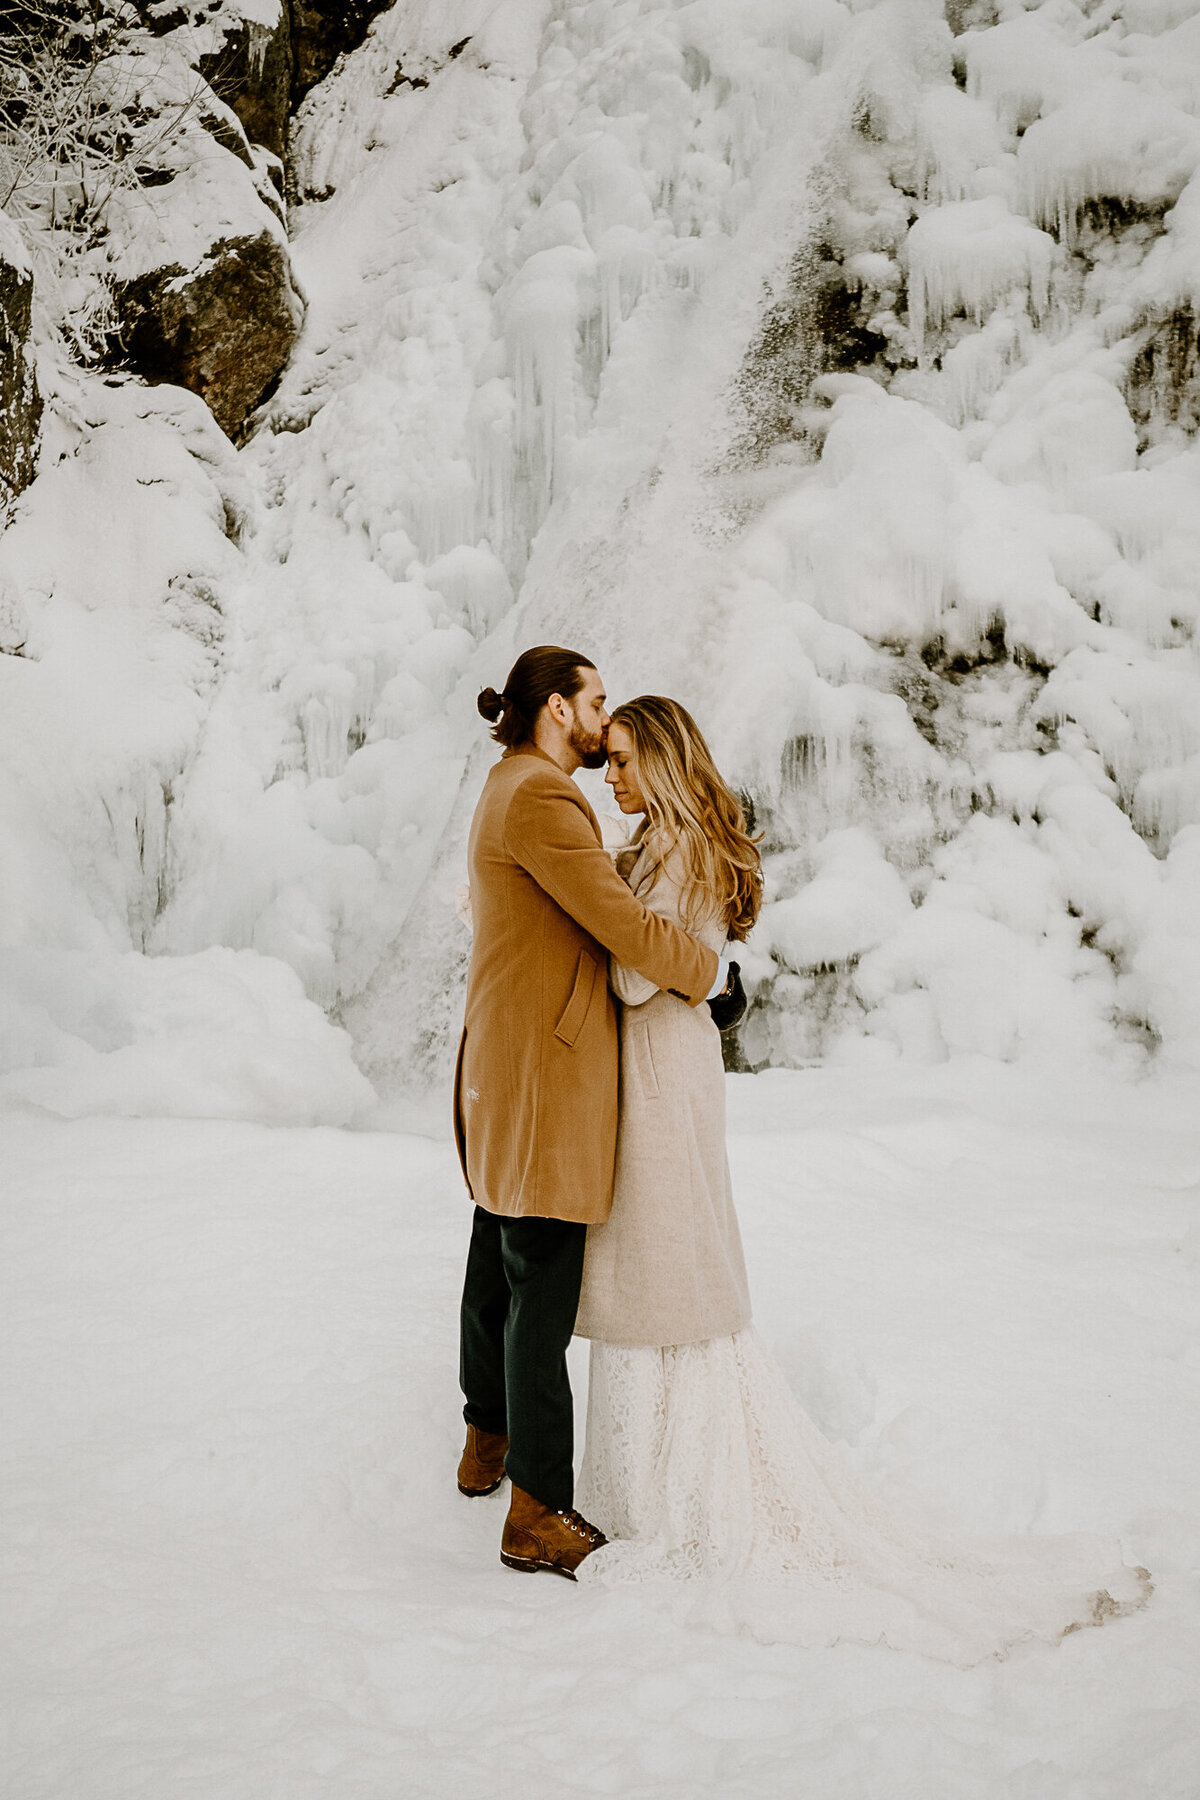 White-Mountains-New-Hampshire-Winter-Elopement (274 of 420)